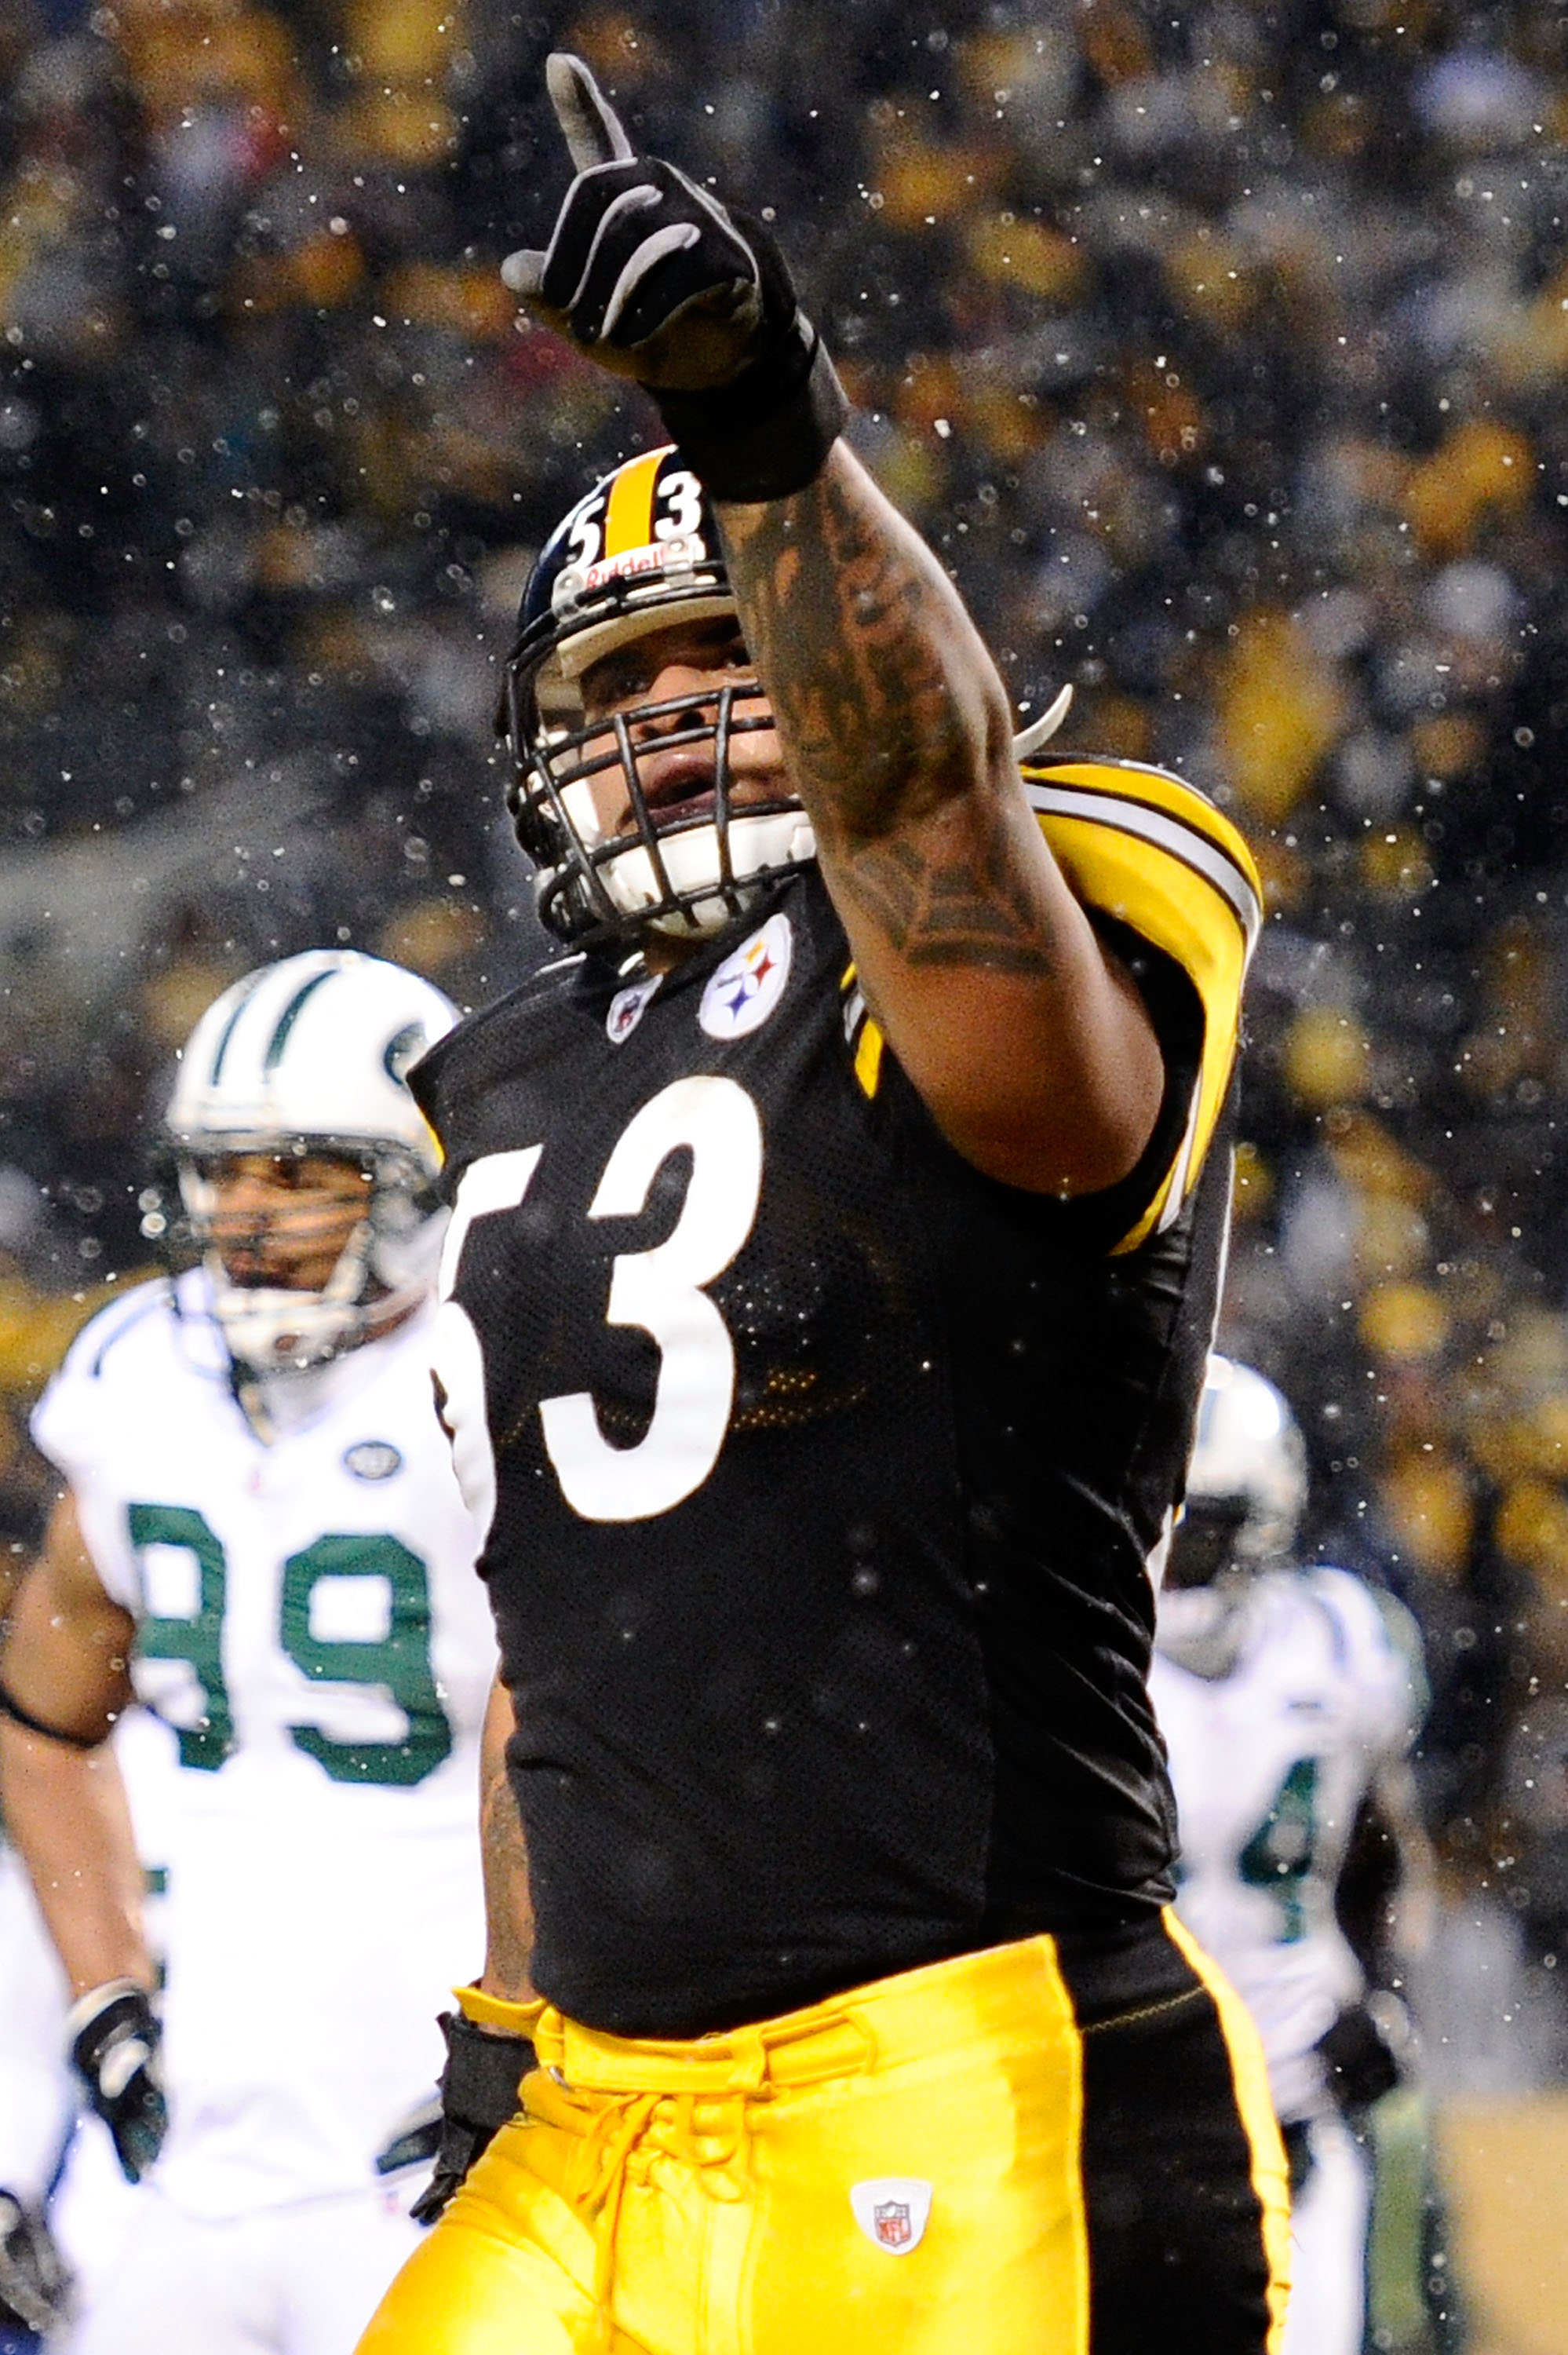 PITTSBURGH - DECEMBER 19:  #53 Maurkice Pouncey reacts during the game against the New York Jets at Heinz Field on December 19, 2010 in Pittsburgh, Pennsylvania.  (Photo by Karl Walter/Getty Images)